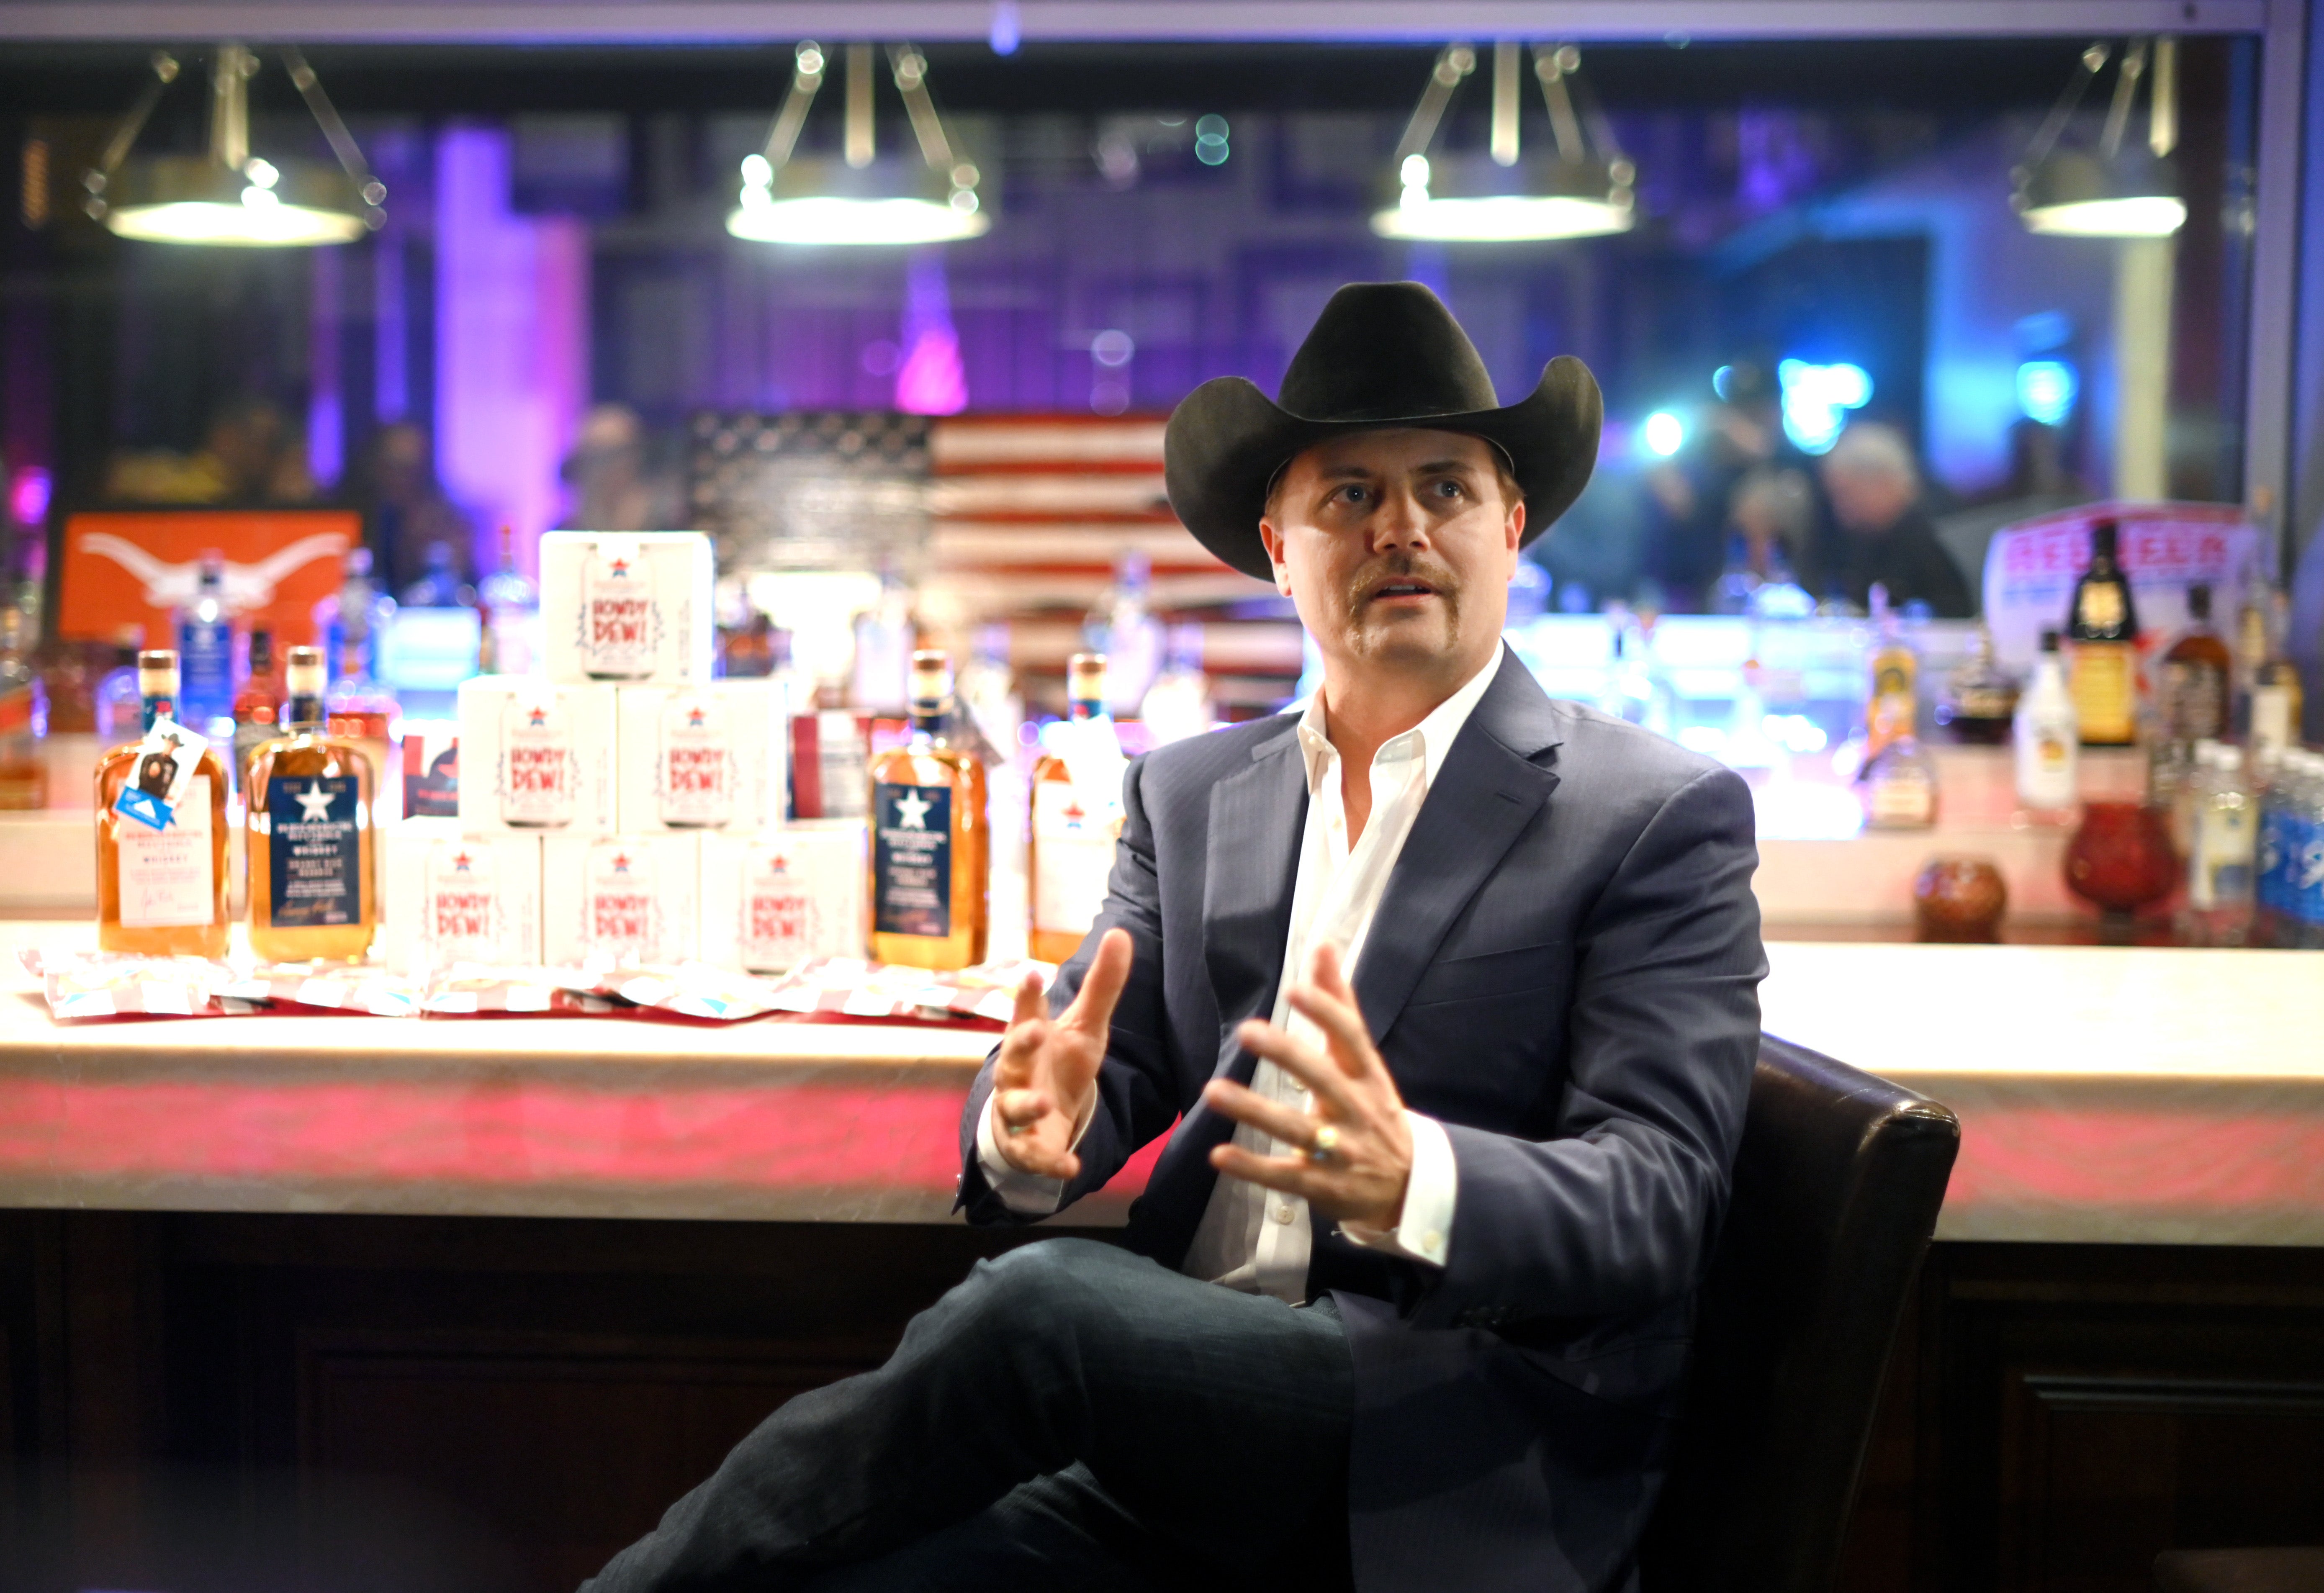 John Rich on cancel culture in America: ‘Our country is being dismantled piece by piece’